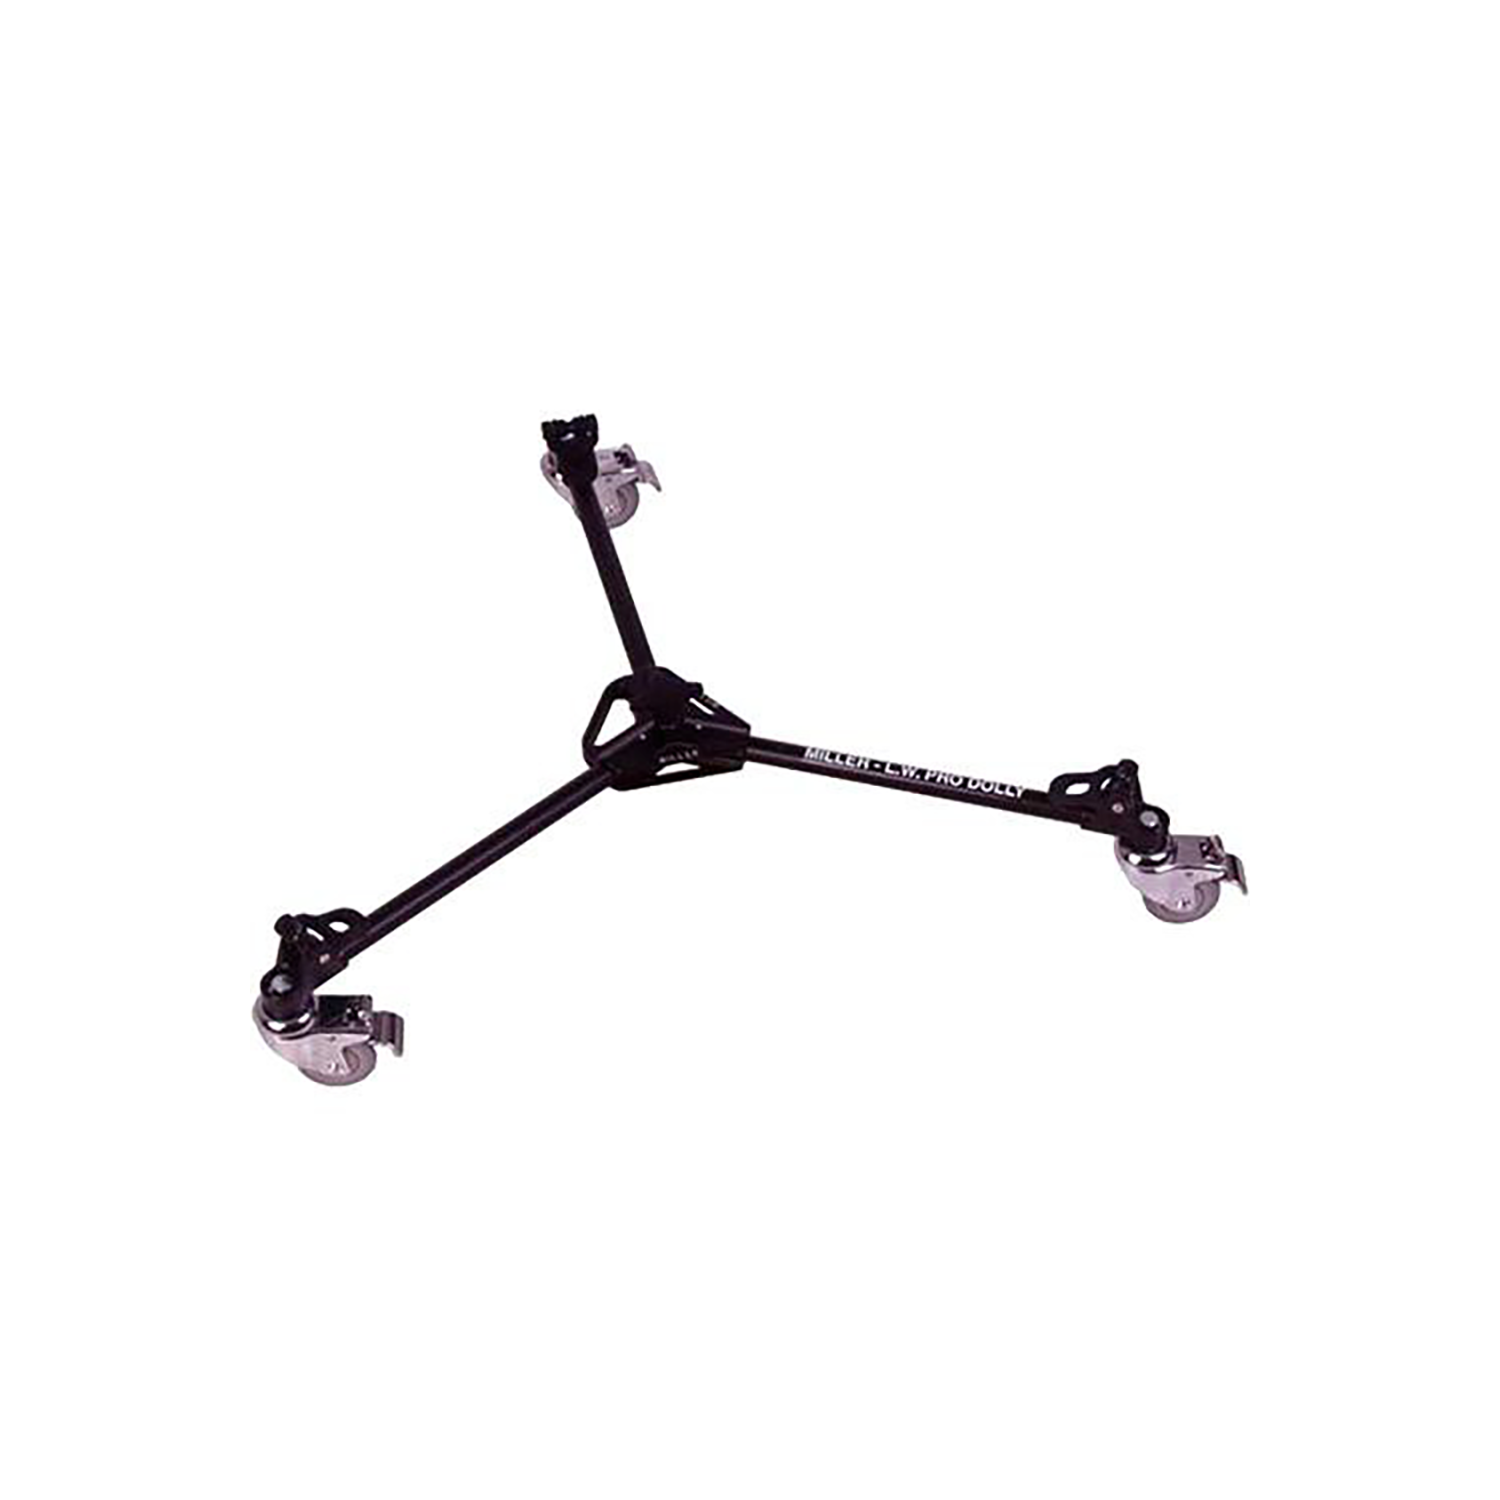 MILLER LW Dolly to suit 75mm Toggle Tripods